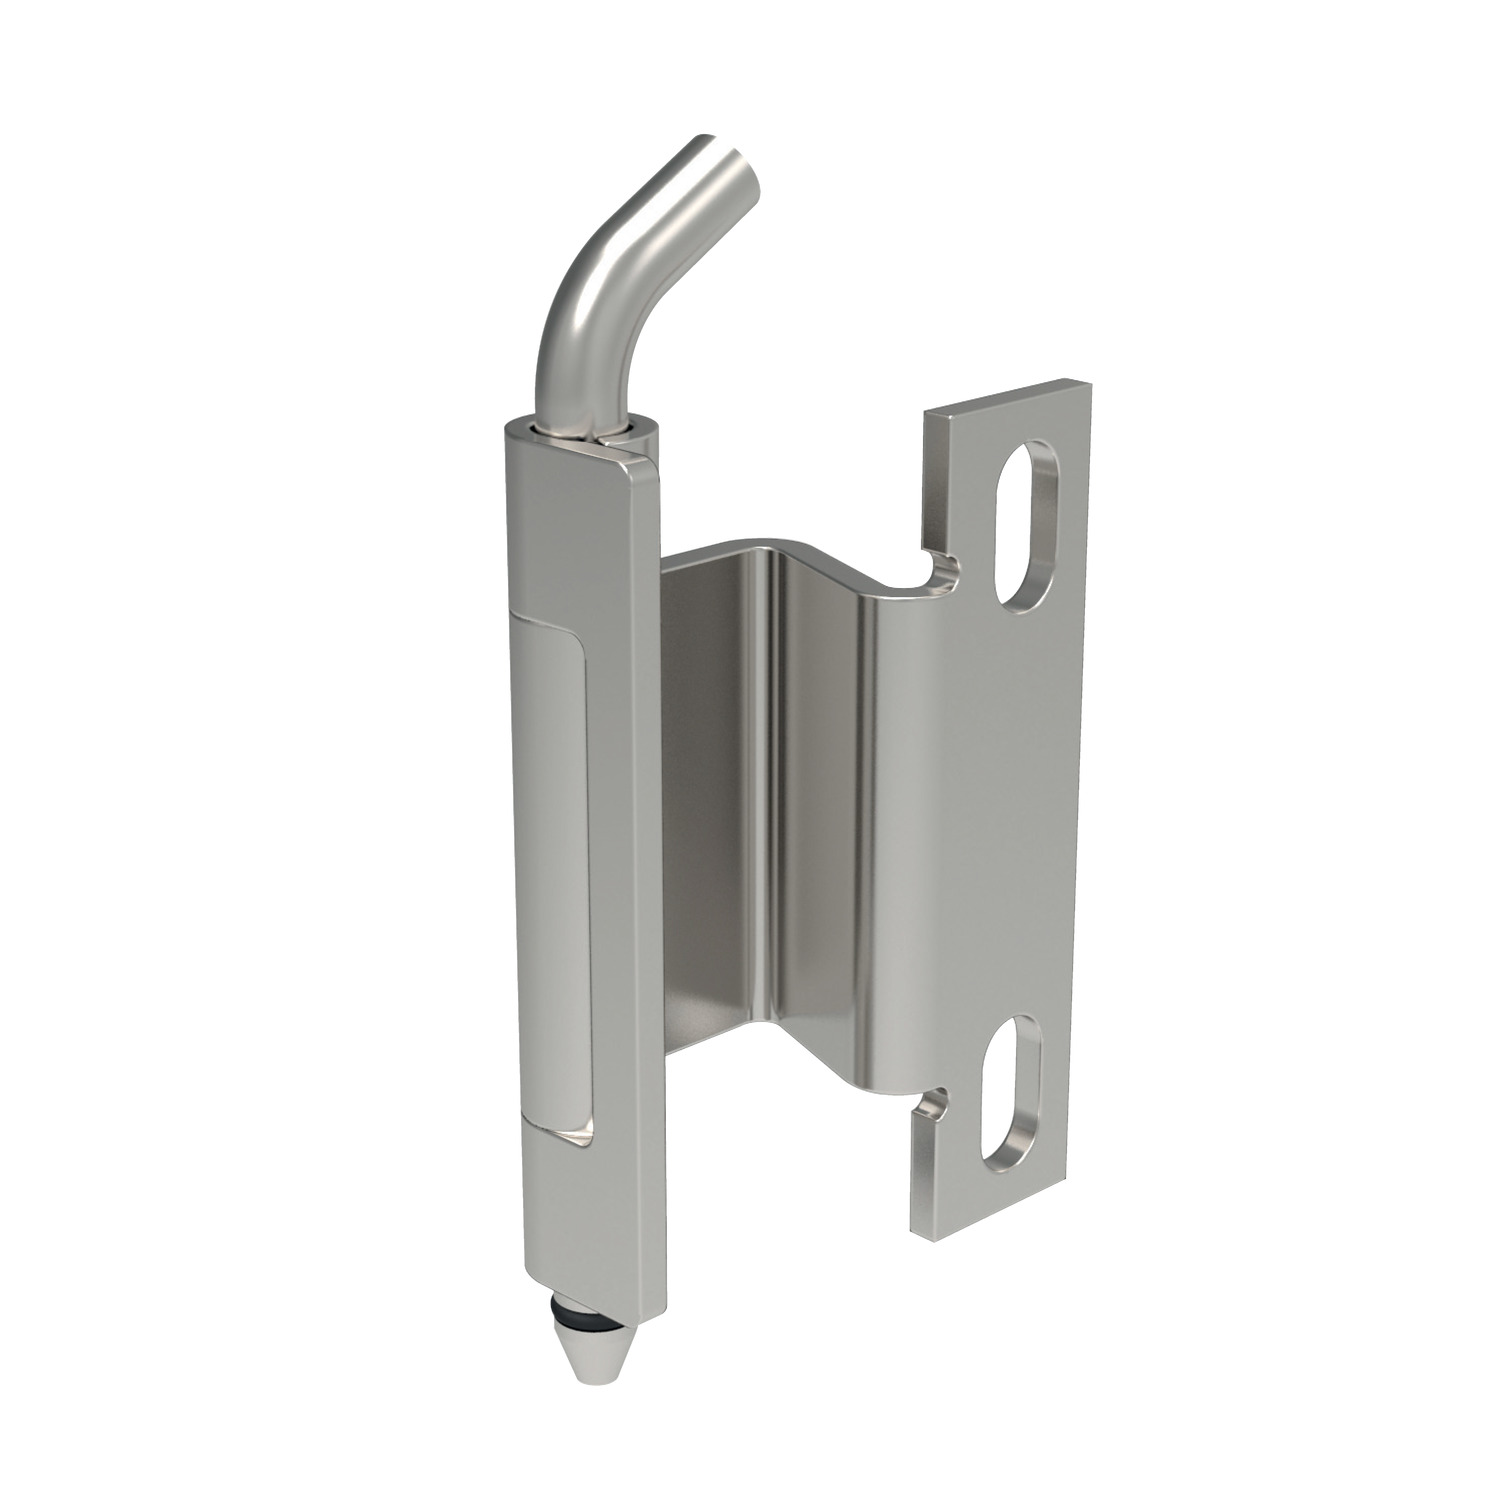 S2121.AW0020 Concealed Pivot Hinges weld and oval head screw